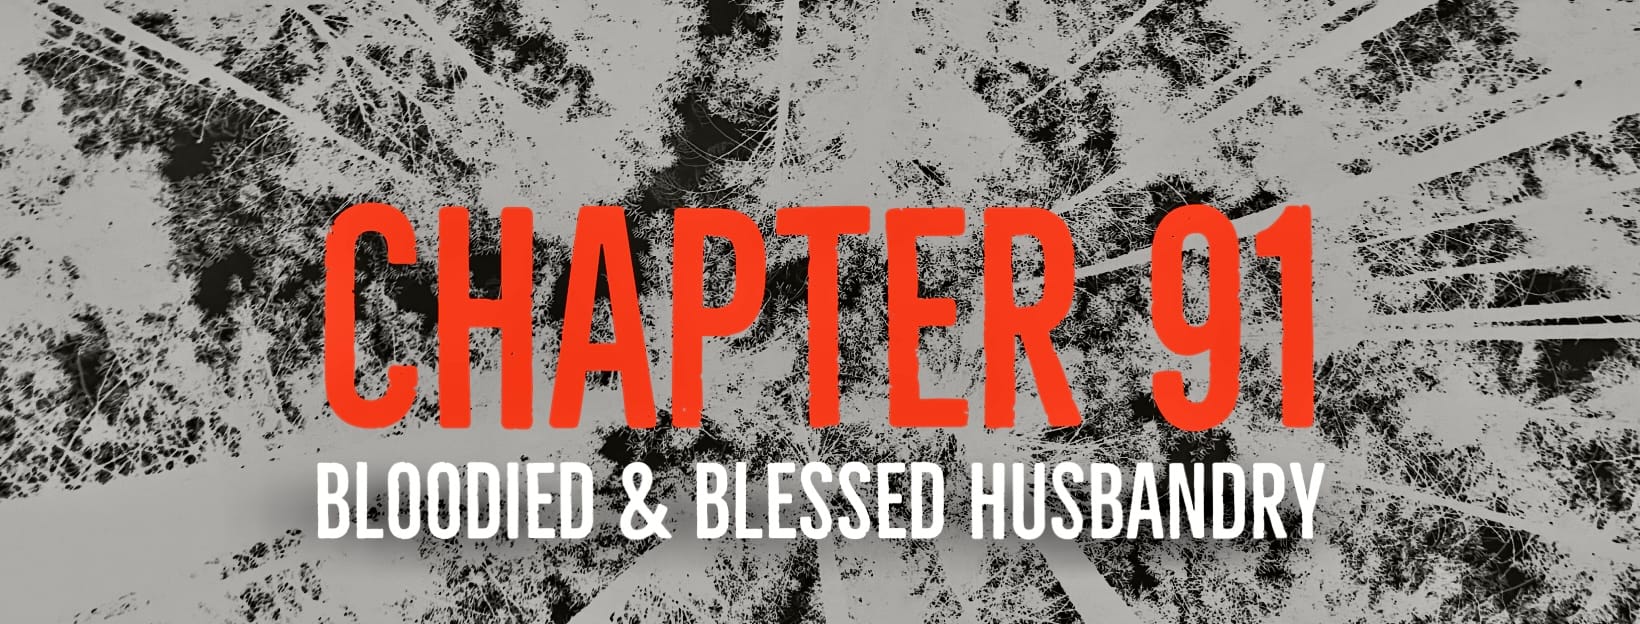 CHAPTER 91: HUSBANDRY REQUIRES BLOODYING